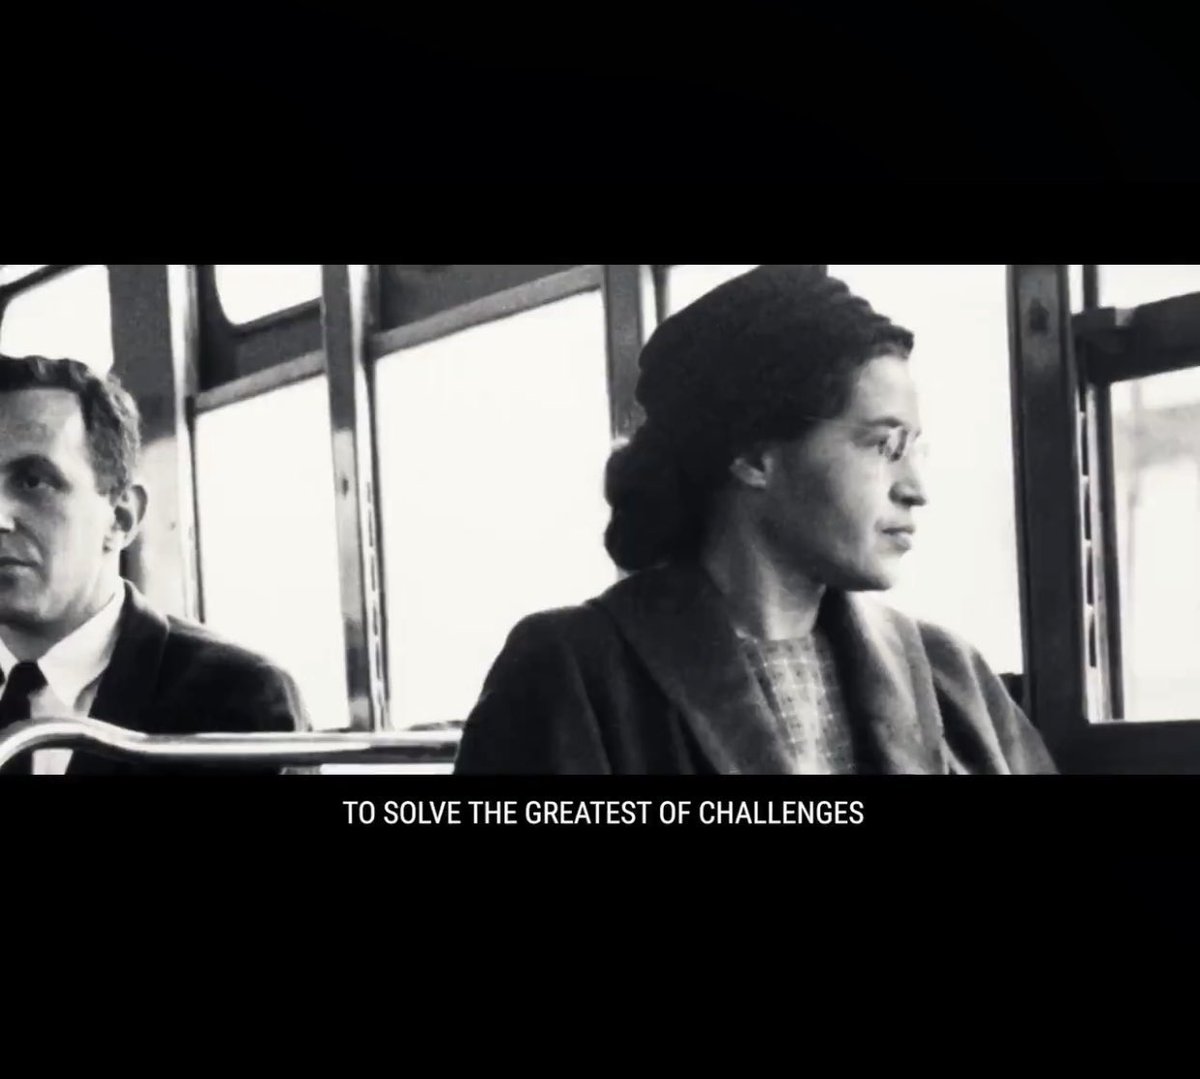 3. Attacking W&K for using an image Rosa parks in a video